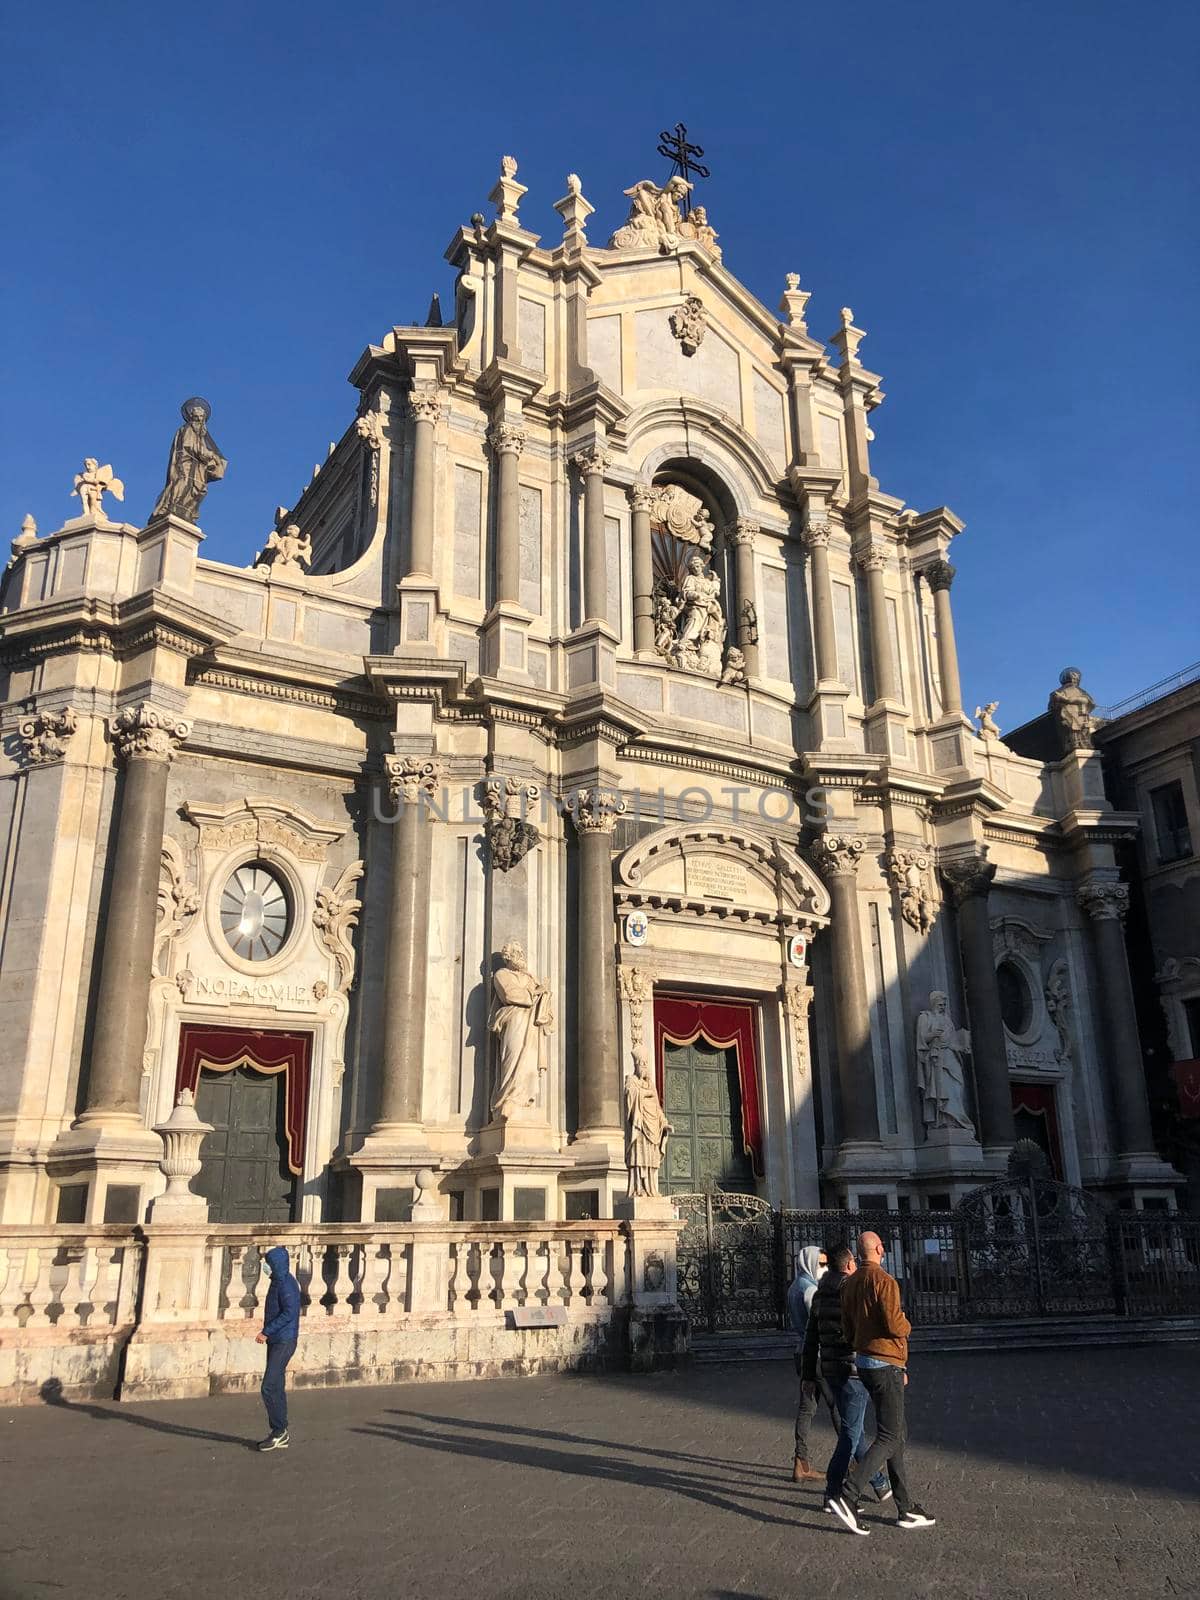 CATANIA, ITALY 28 MARCH 2021: Cathedral of Saint Agata in Catania in Italy